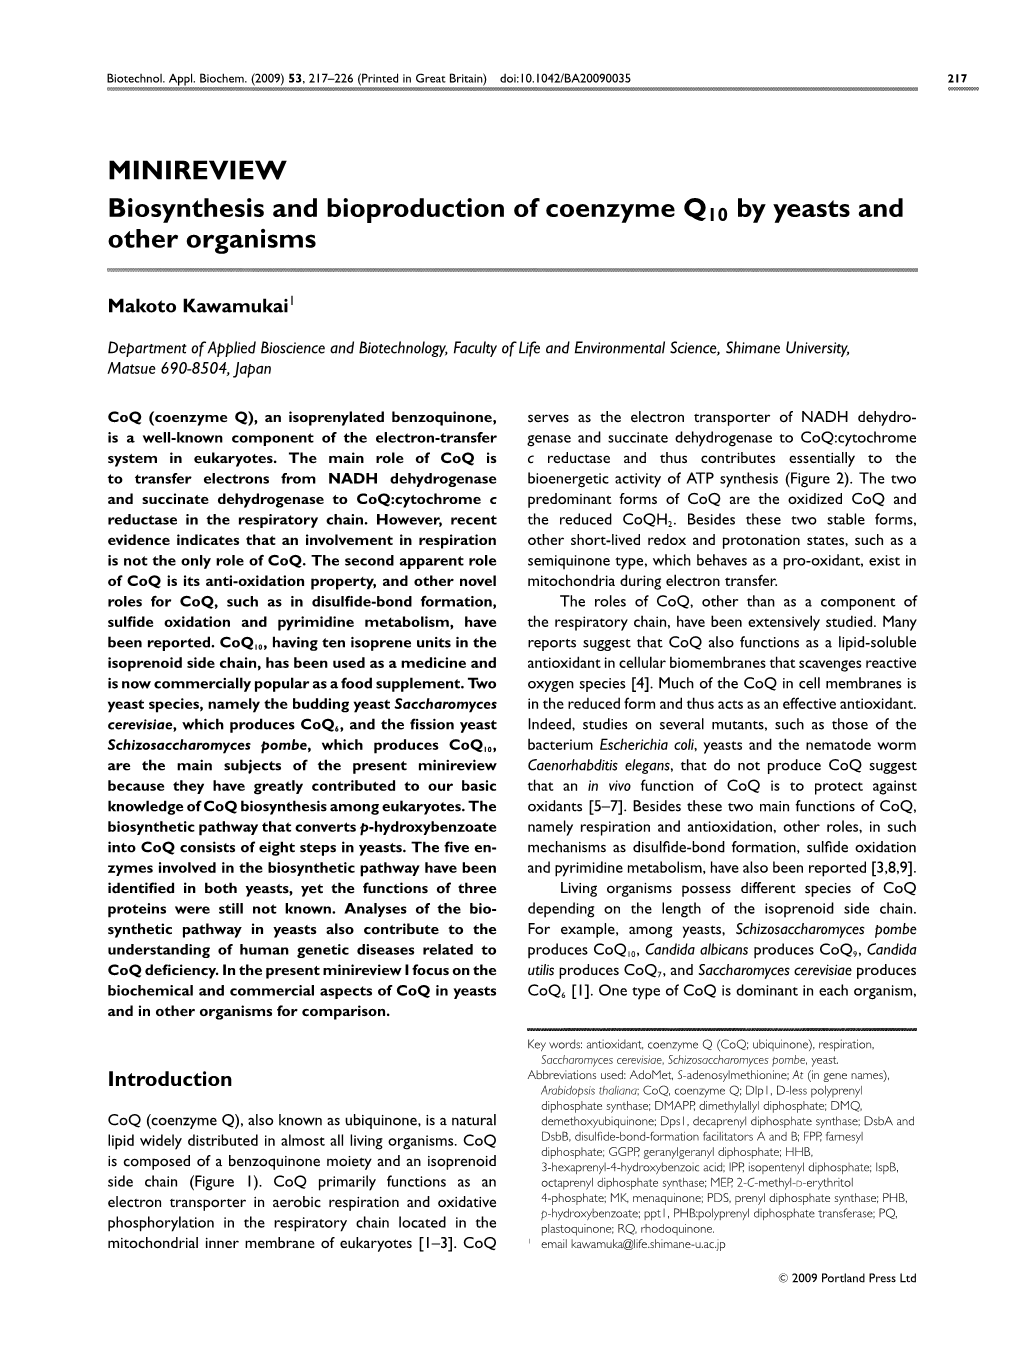 Biosynthesis and Bioproduction of Coenzyme Q10 by Yeasts and Other Organisms